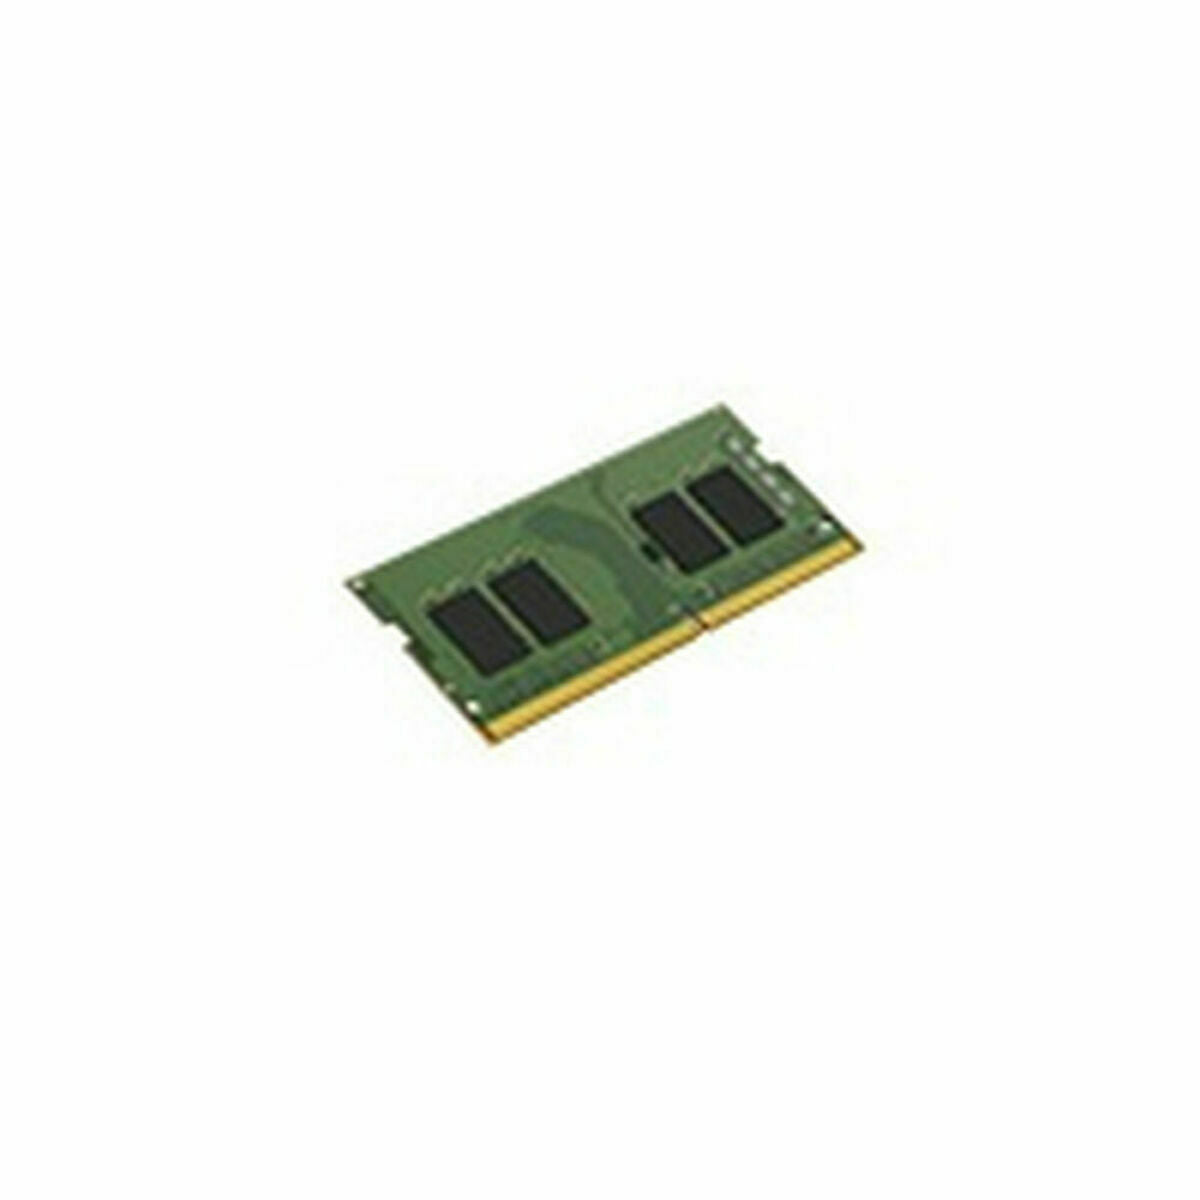 RAM Memory Silicon Power SP016GBSFU320X02 DDR4 3200 MHz CL22 16 GB, Silicon Power, Computing, Components, ram-memory-silicon-power-sp016gbsfu320x02-ddr4-3200-mhz-cl22-16-gb, Brand_Silicon Power, category-reference-2609, category-reference-2803, category-reference-2807, category-reference-t-19685, category-reference-t-19912, category-reference-t-21360, computers / components, Condition_NEW, Price_50 - 100, Teleworking, RiotNook